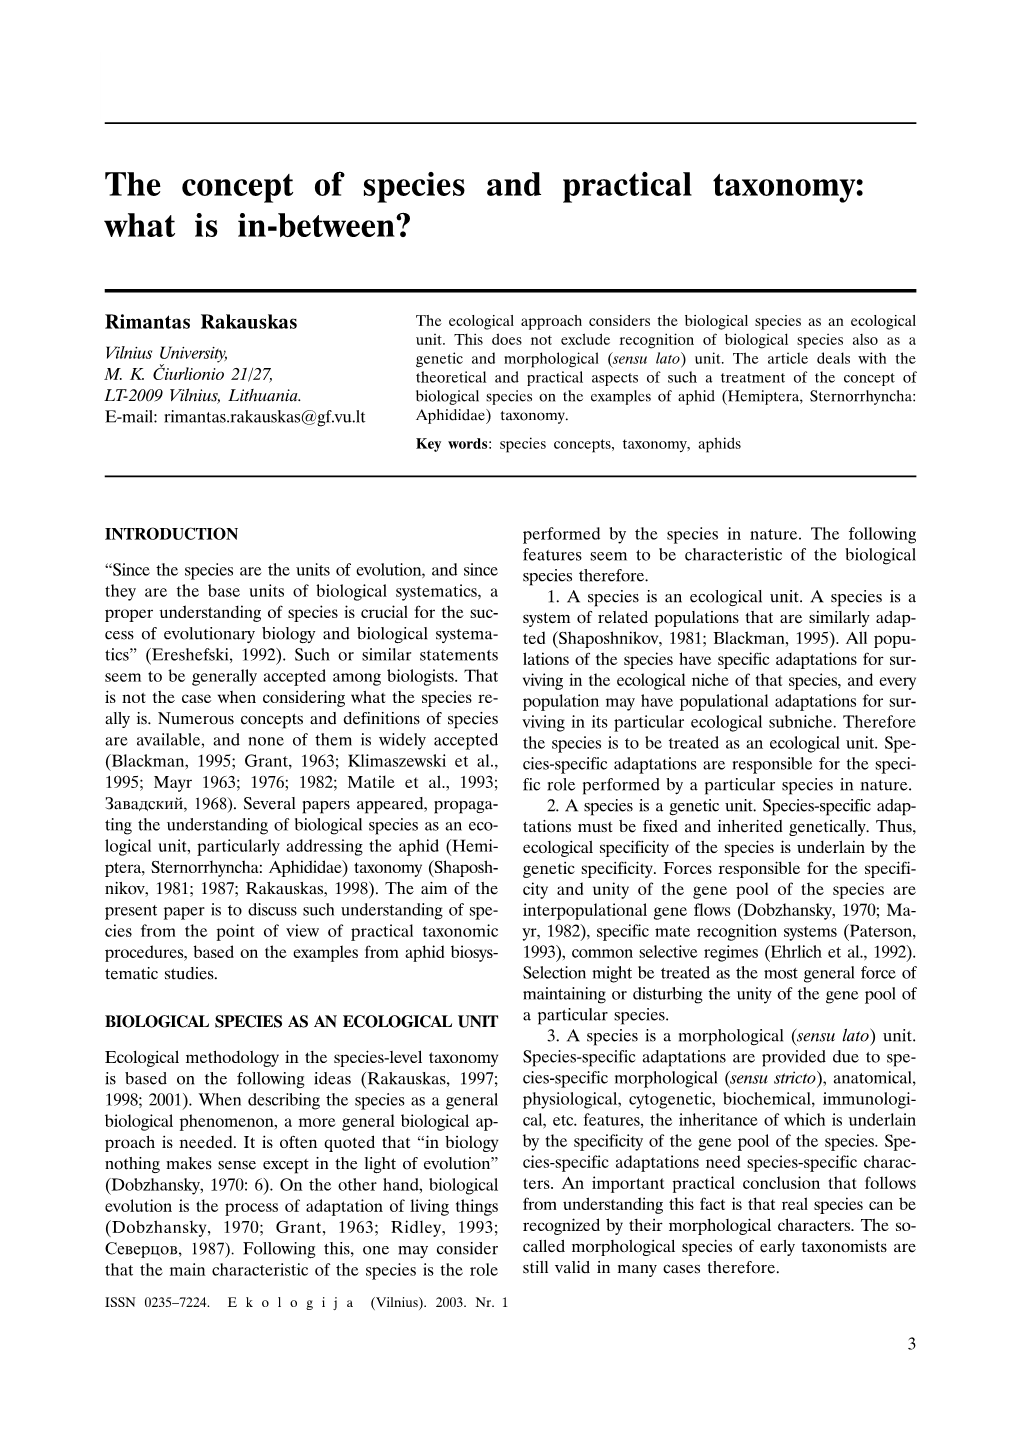 The Concept of Species and Practical Taxonomy: What Is In-Between?